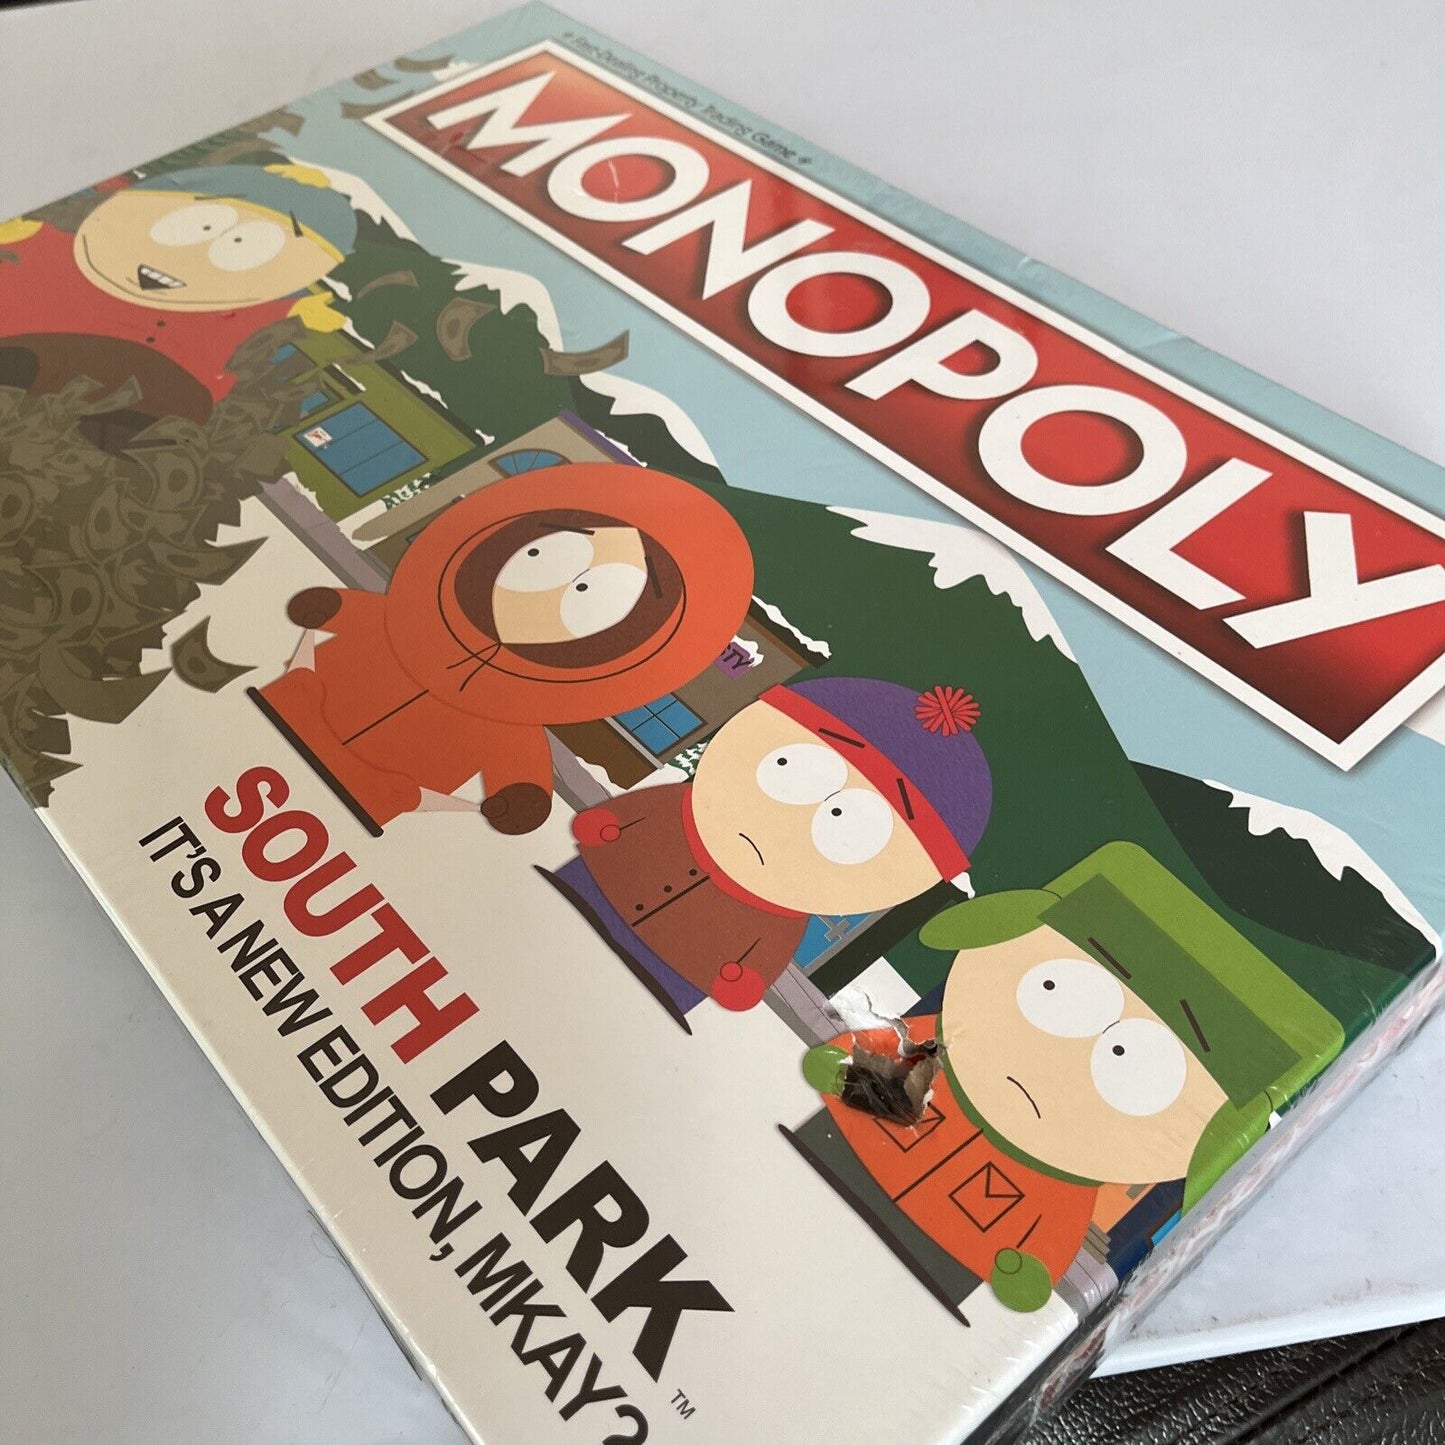 *New Sealed* Monopoly South Park It's A New Edition, Mkay? Board Game - WIN01956